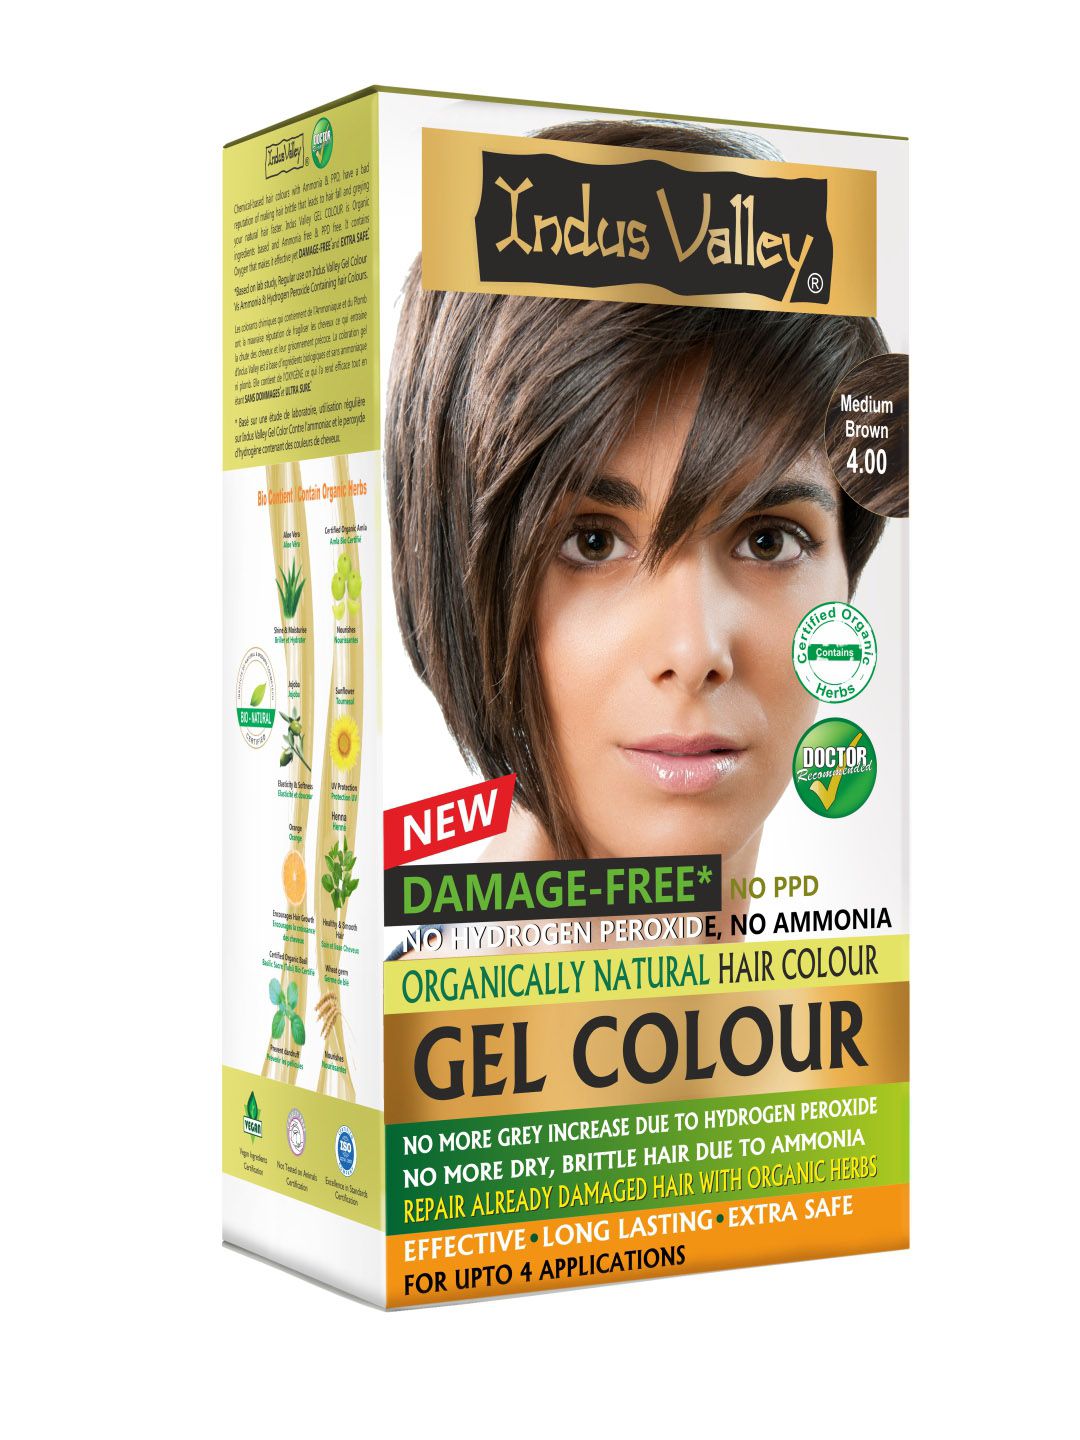 Indus Valley Organically Natural Gel Hair Colour- Medium Brown 4.0 220 g Price in India